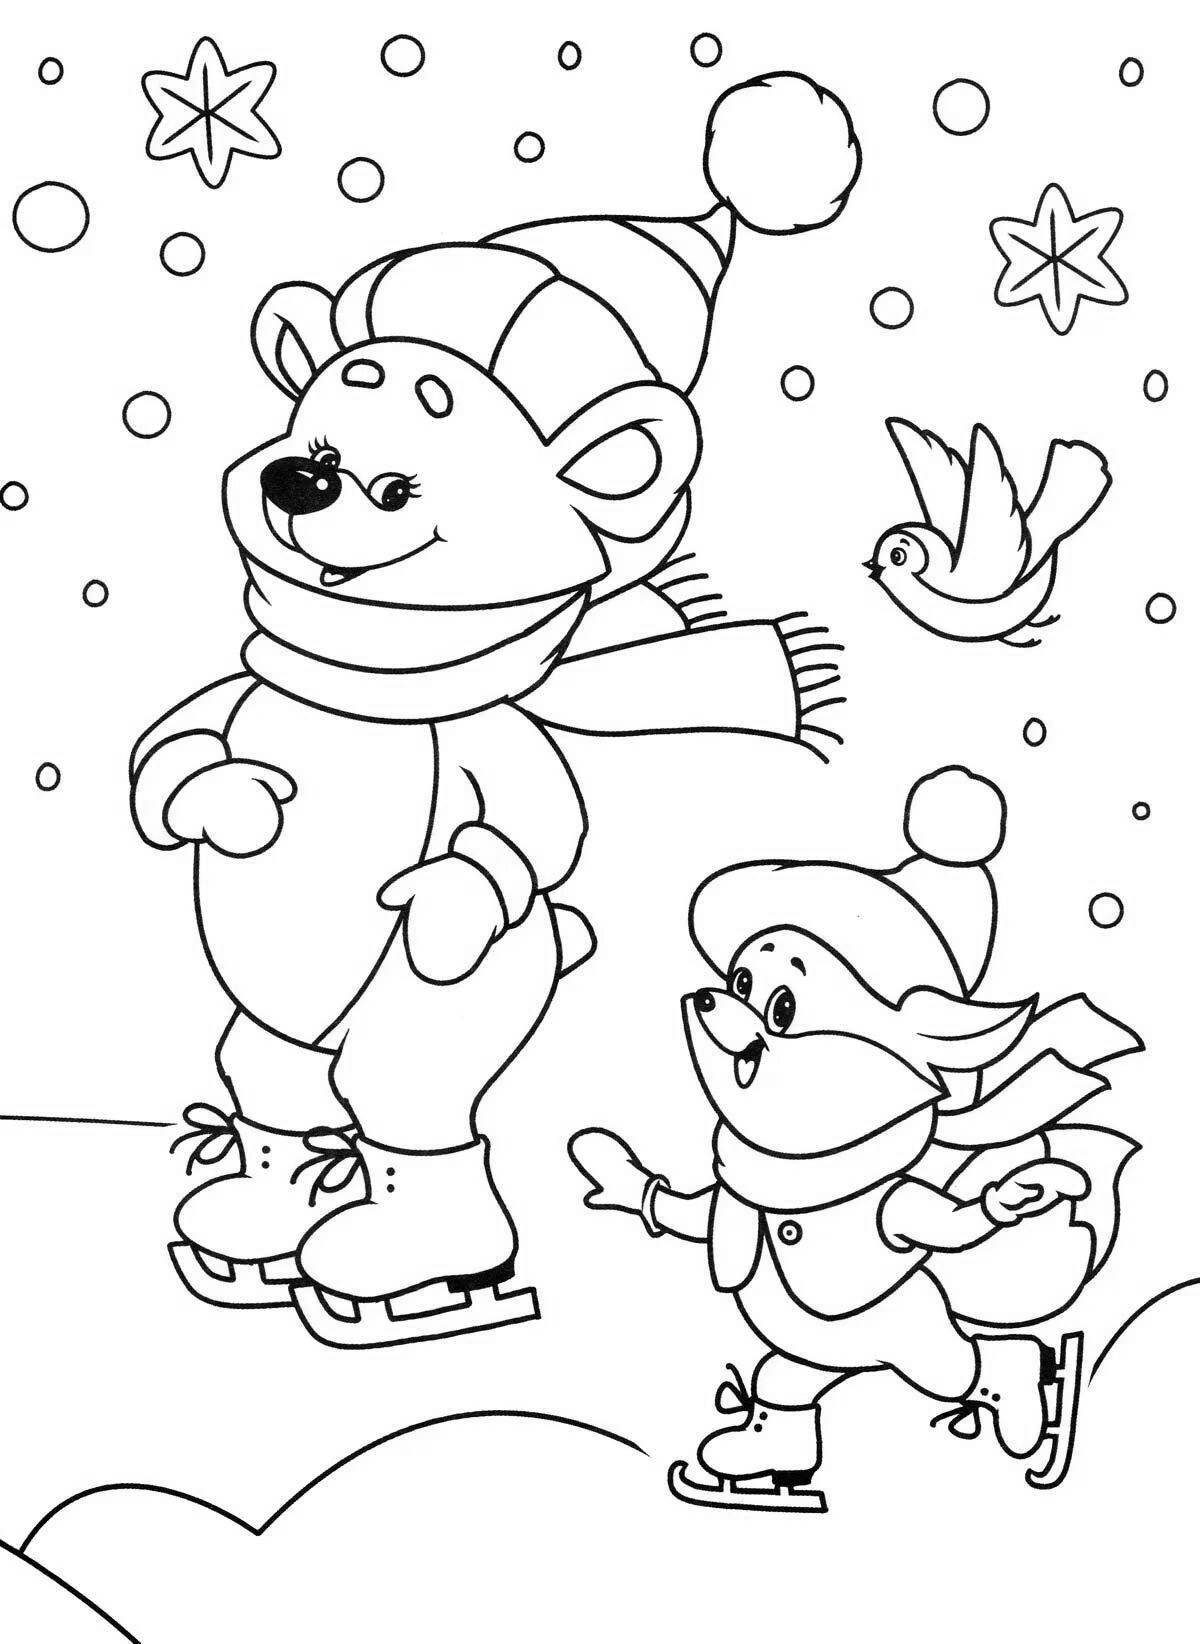 Elegant 5 Years Winter Coloring Page